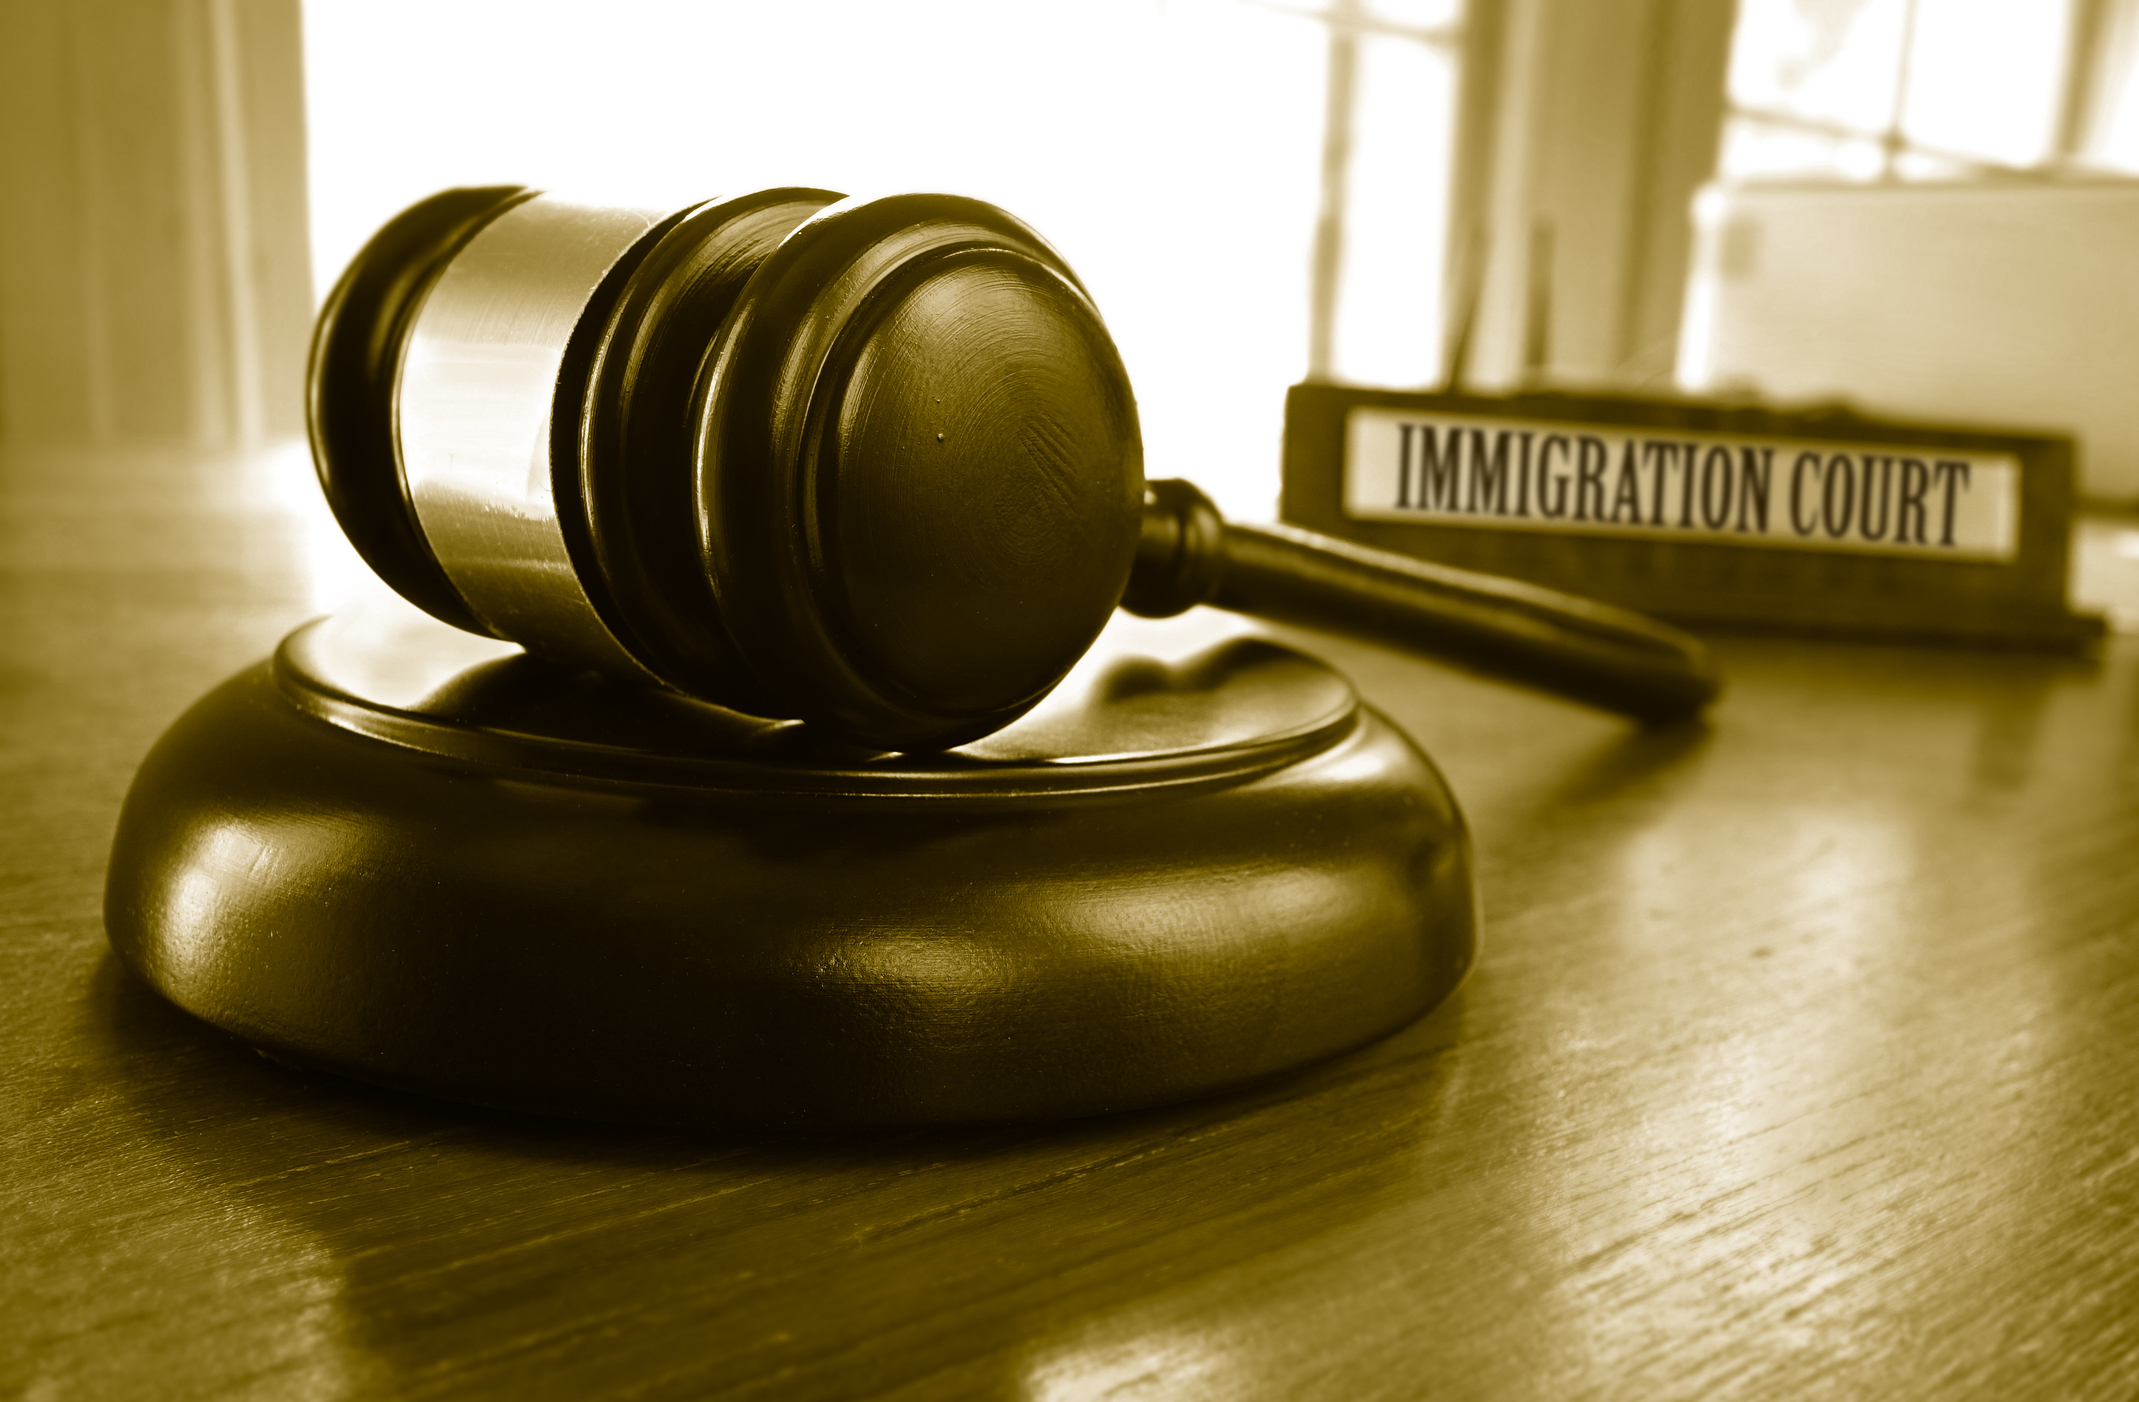 Biden Administration Gives More Discretion to Prosecutors to Pursue or Drop Immigration Cases